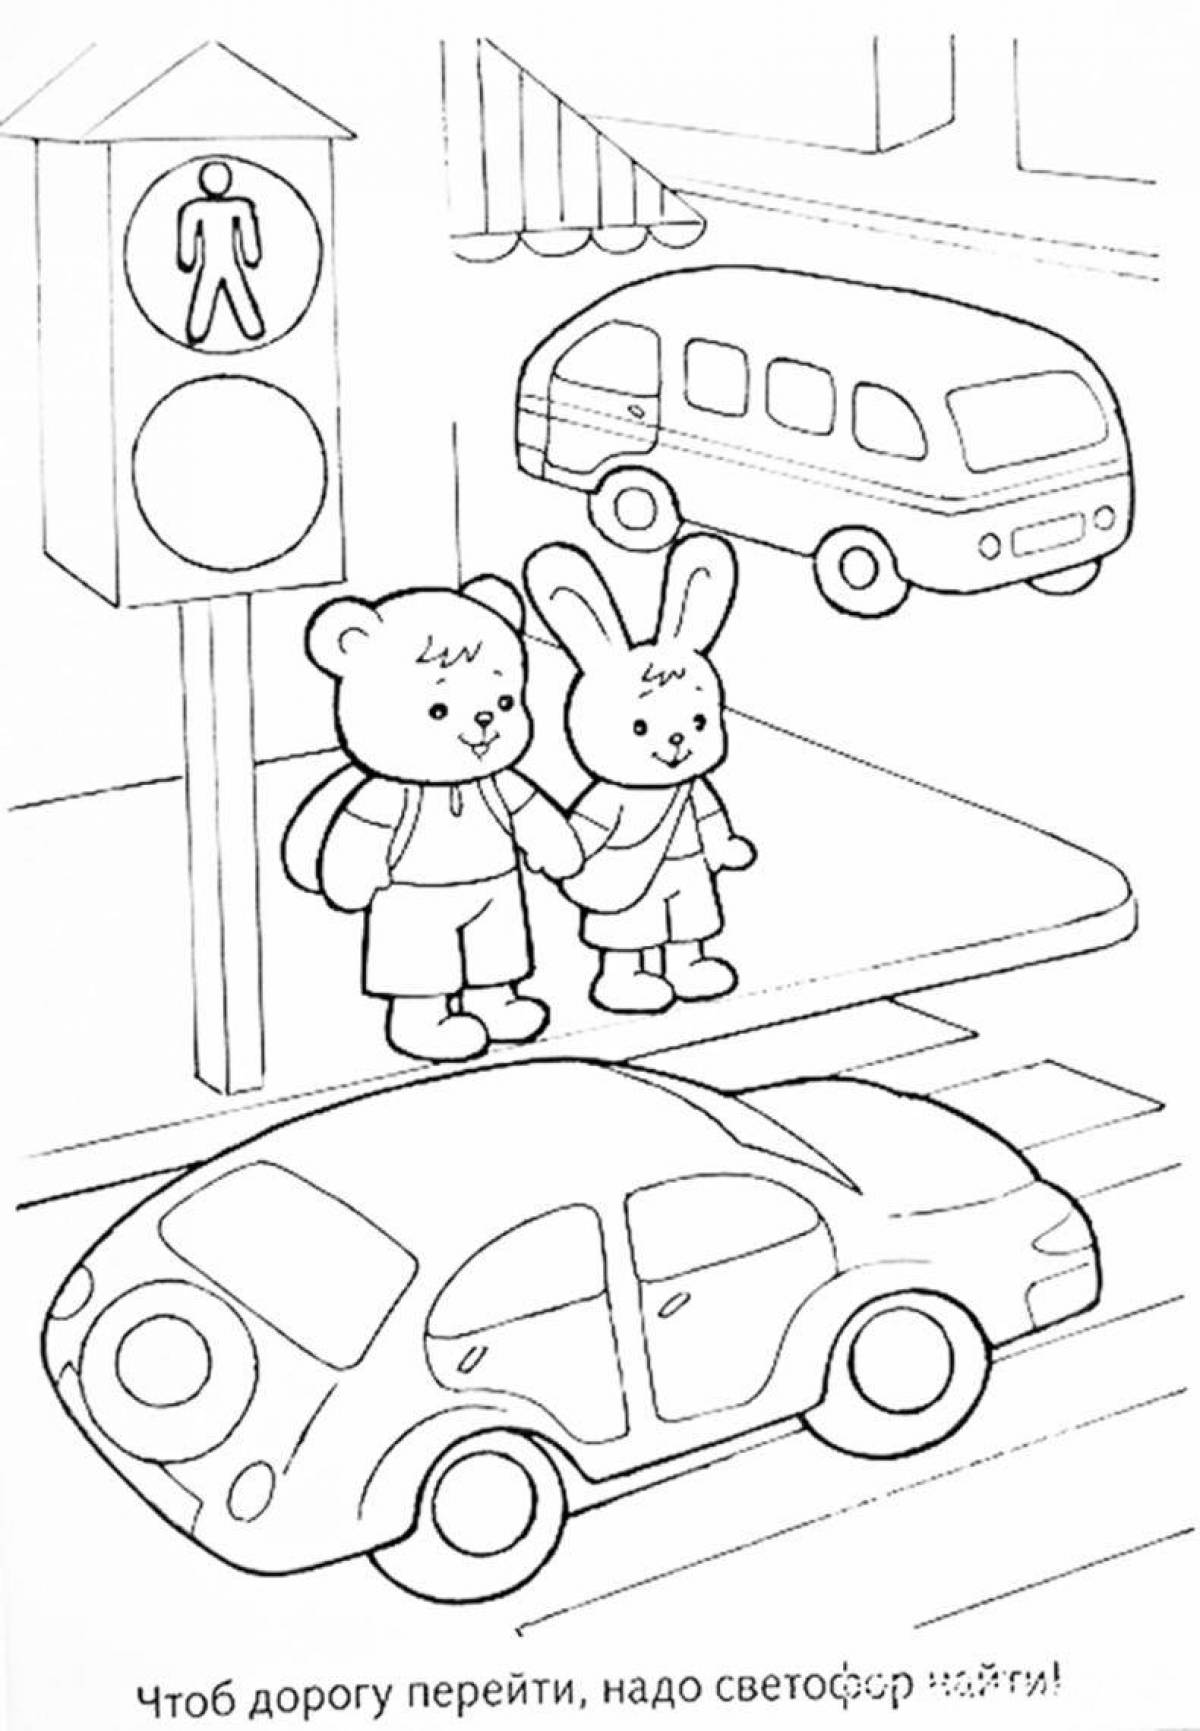 Amazing rules of the road vsht coloring book